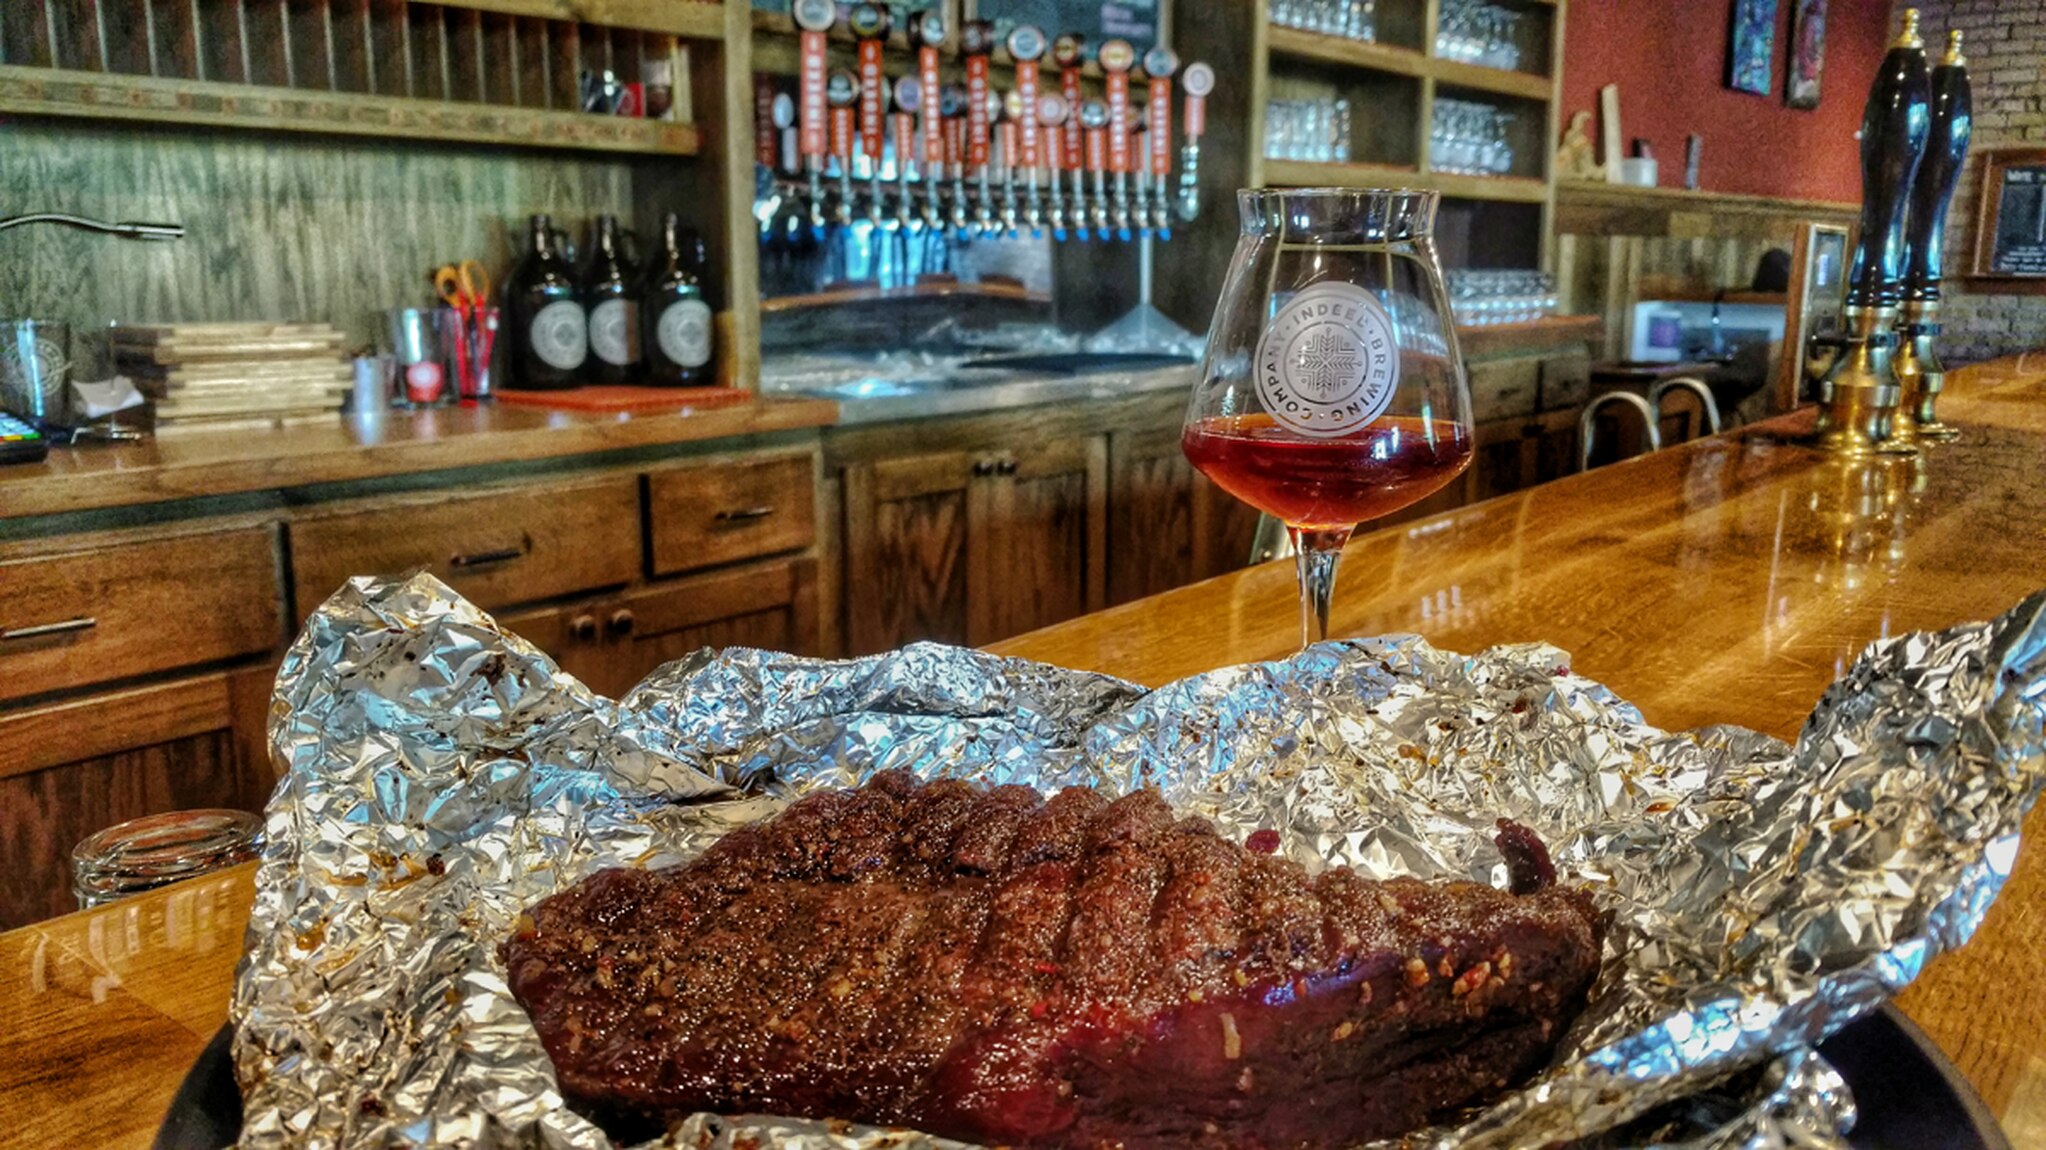 A bourbon-maple venison steak aged and cooked to perfection.